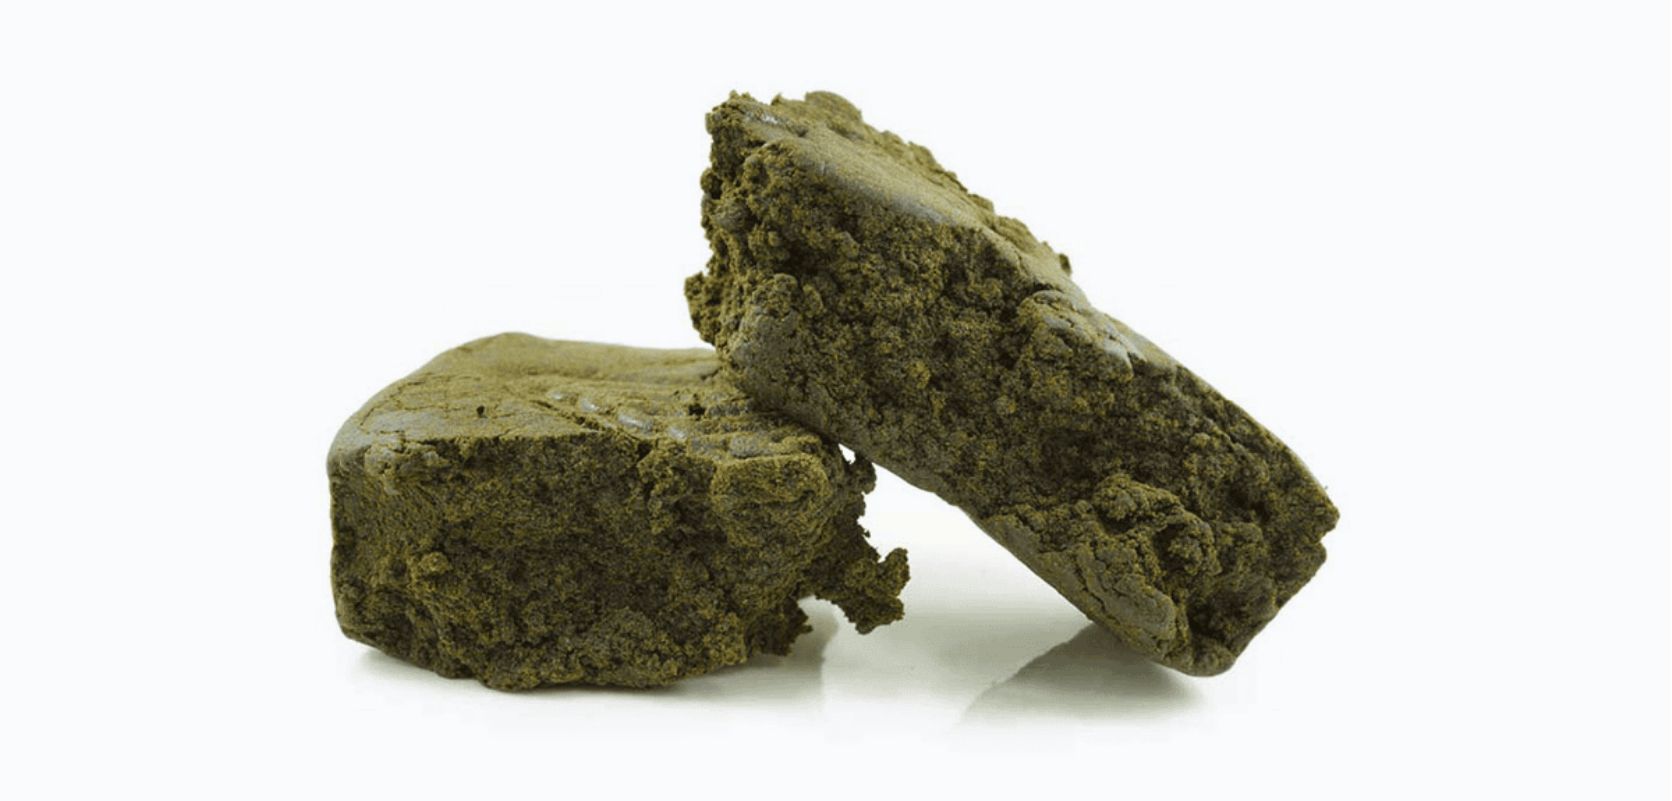 First, you need to learn about the different types of hash and what they bring to the table. When you buy weed online in Canada, you'll get to taste: